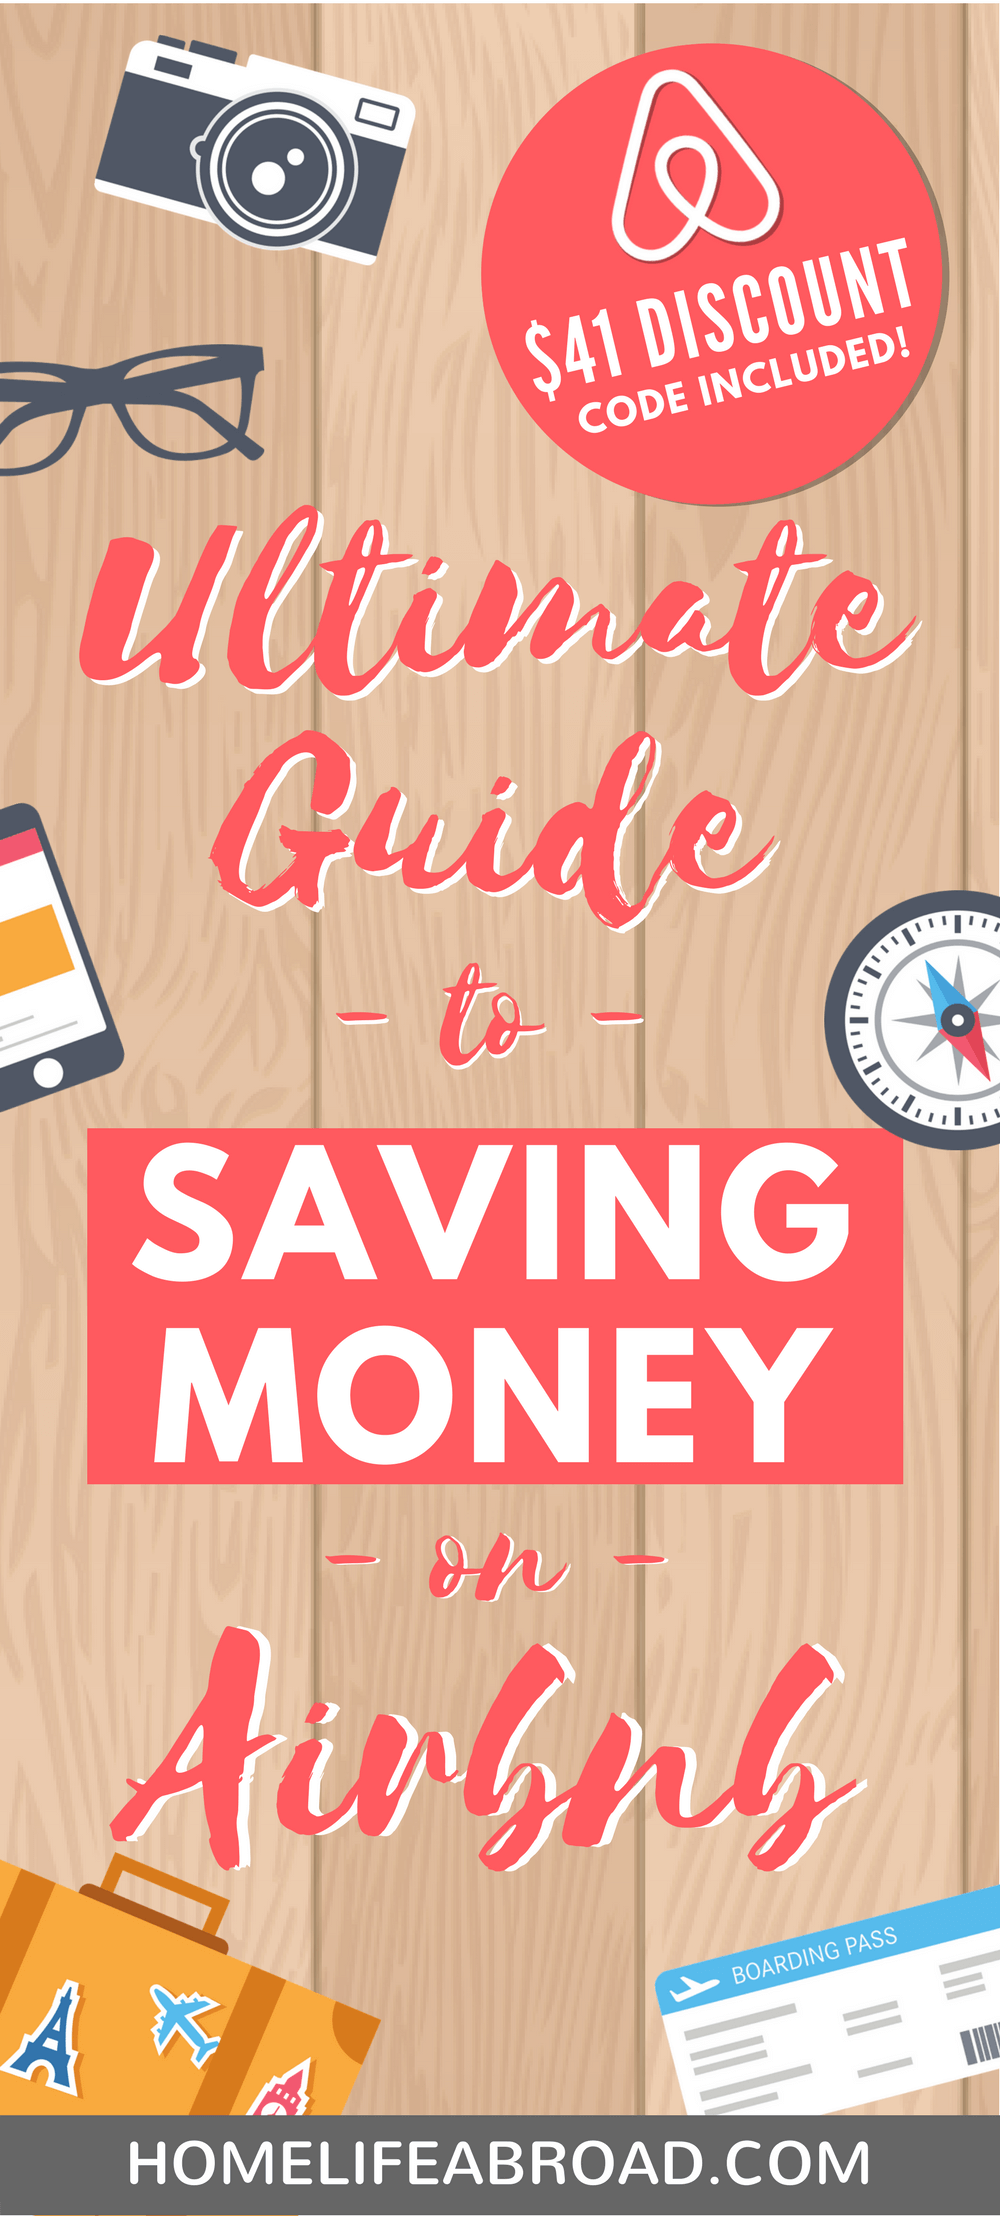 The Ultimate Guide to Saving Money on Airbnb + $41 discount code included! @homelifeabroad #airbnb #savemoney #travel #travelsavings